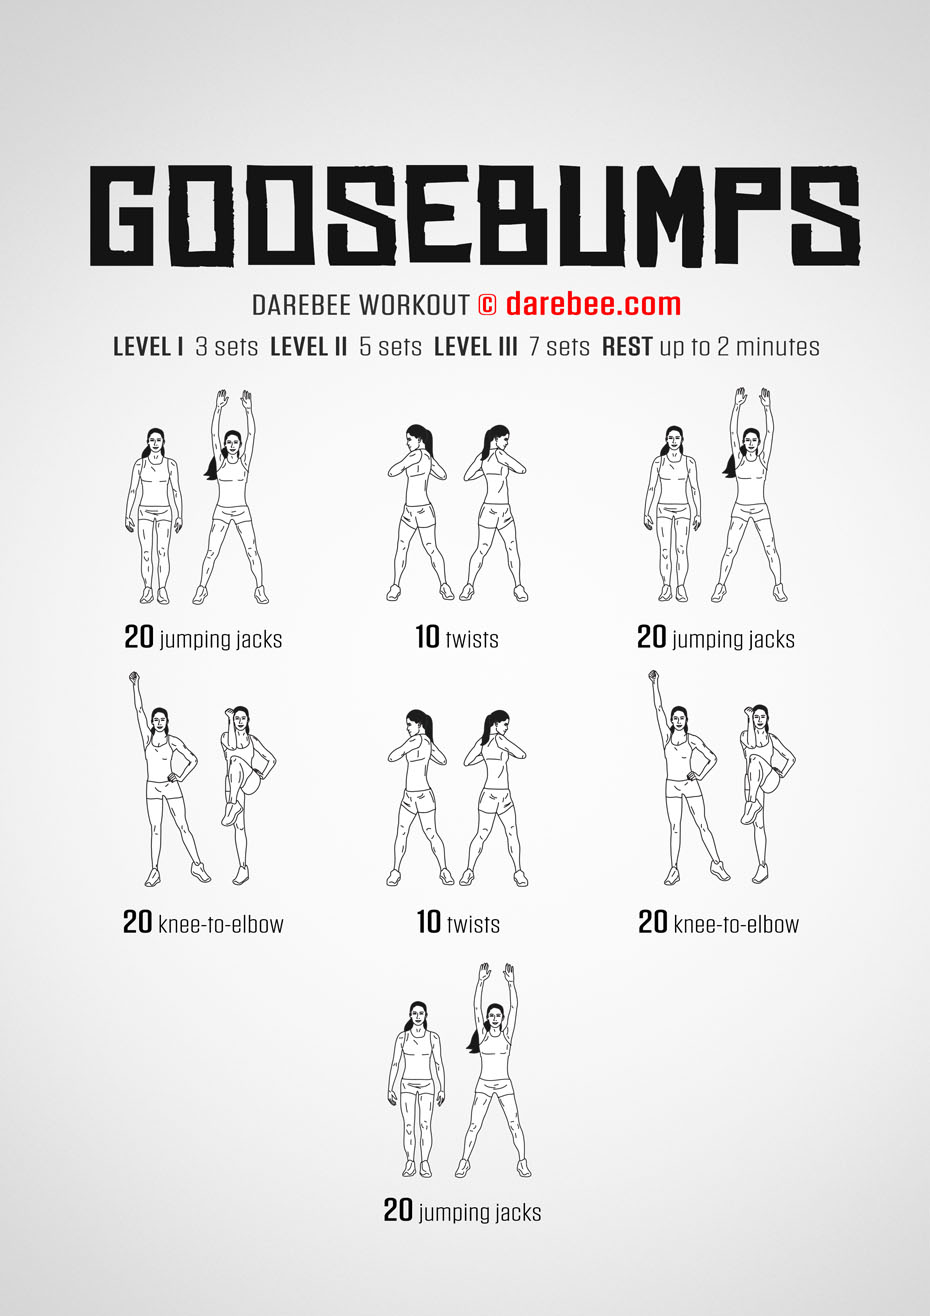 Goosebumps is a high-burn, high-energy aerobic and cardiovascular workout that will leave you feeling refreshed and ready to re-start your day.